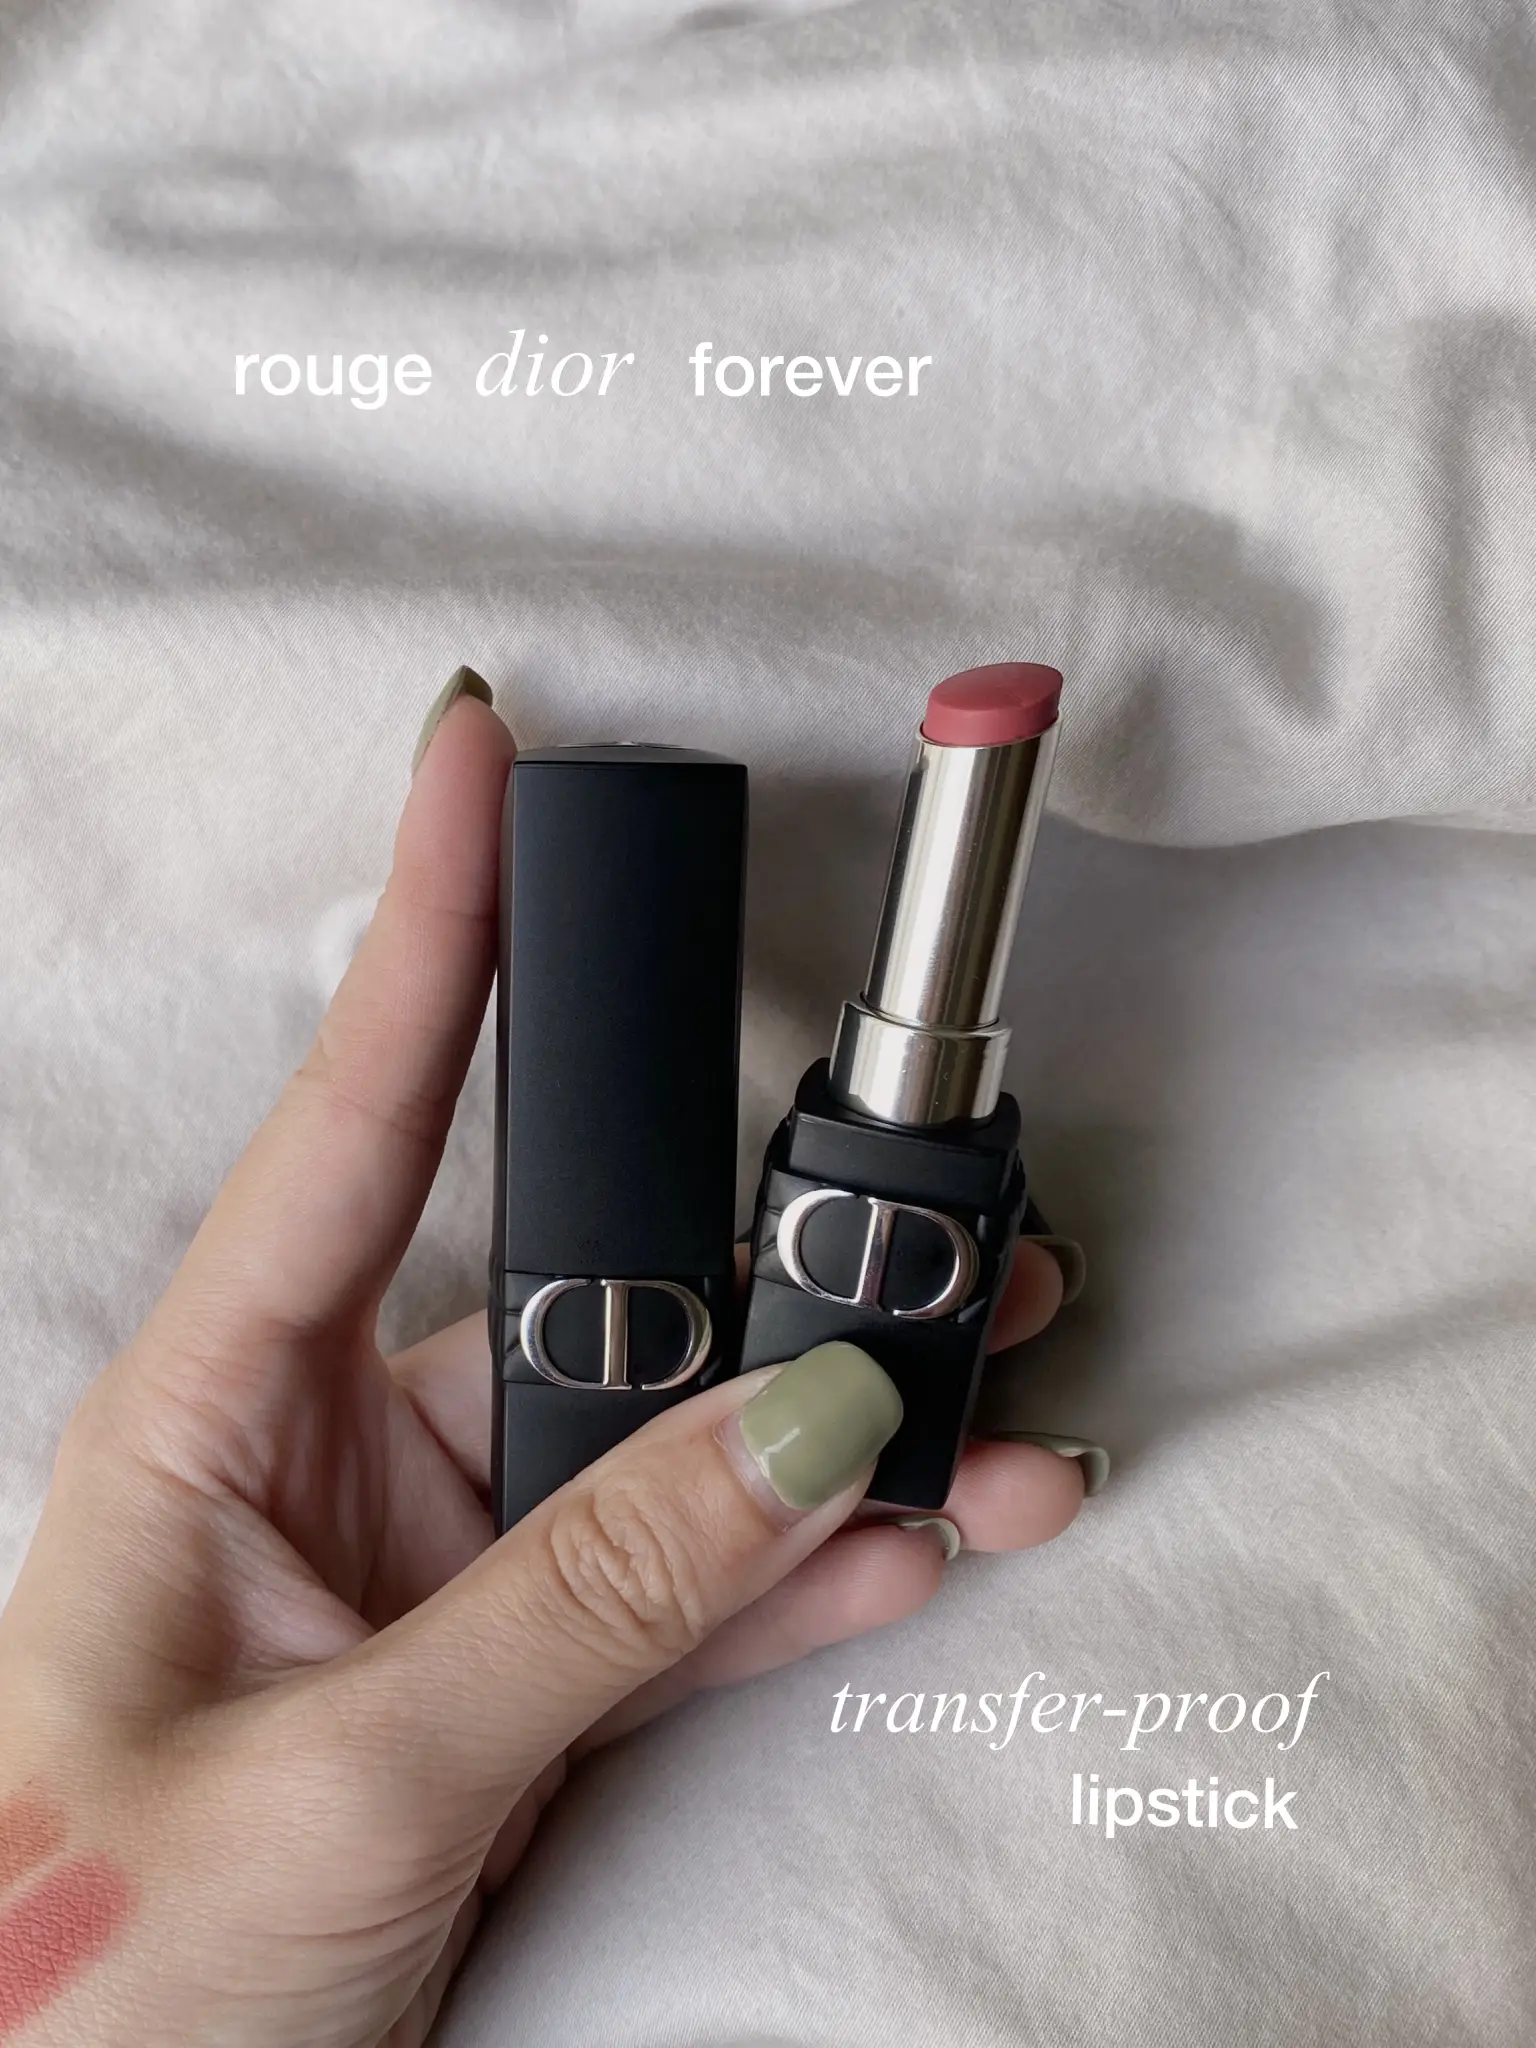 trying out dior's transfer-proof lipsticks 💋